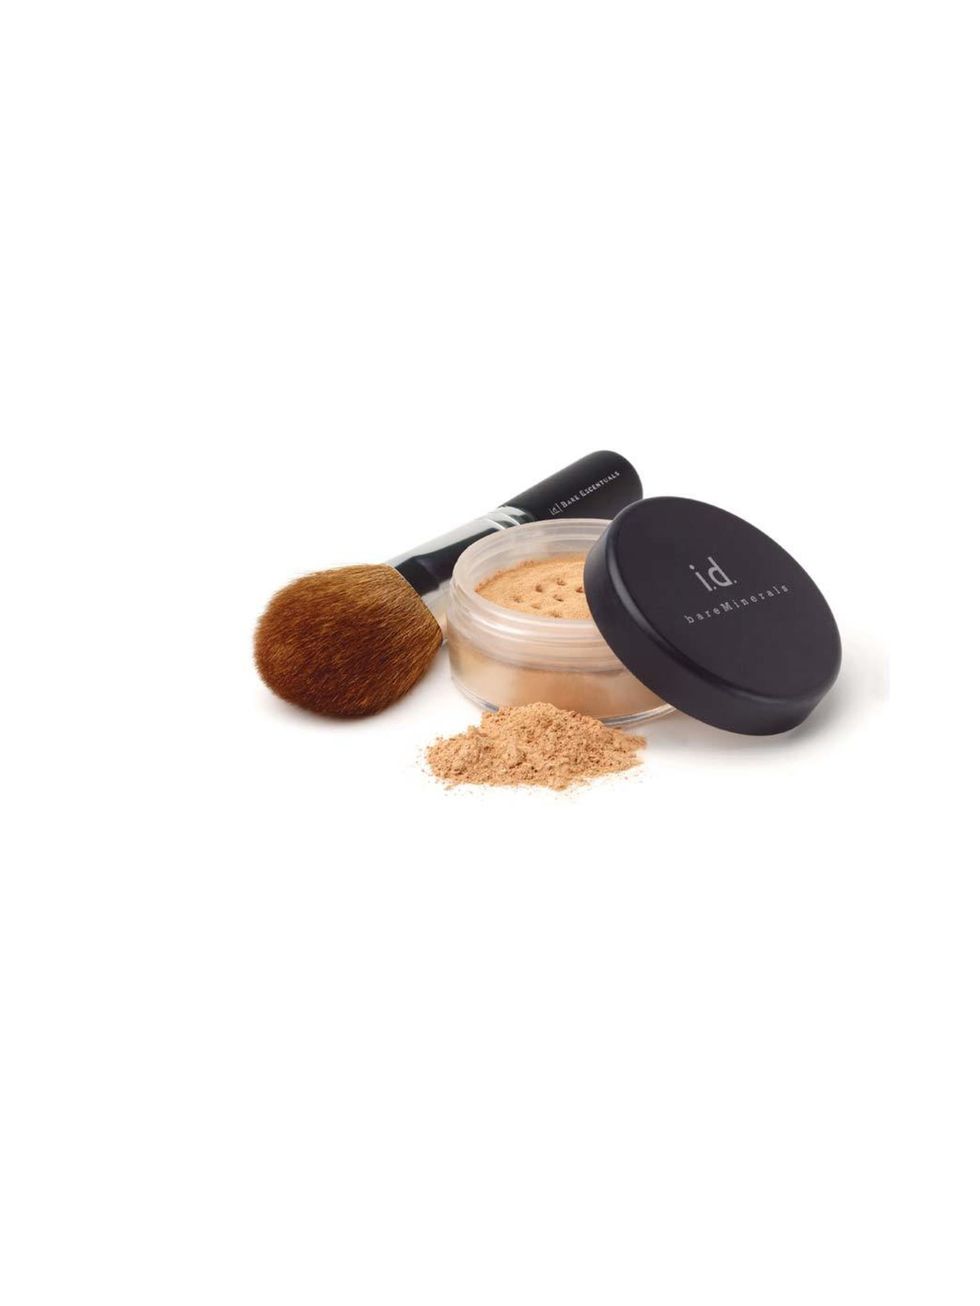 <p><a href="http://www.bareminerals.co.uk/bareMinerals-SPF-15-Foundation/UKMasterSPF15Found,default,pd.html?cgid=BM_SUB_FOUNDATION"></a></p><p>Denise Leicester swears by using zinc based make-up with micronized minerals, which have soothing qualities for